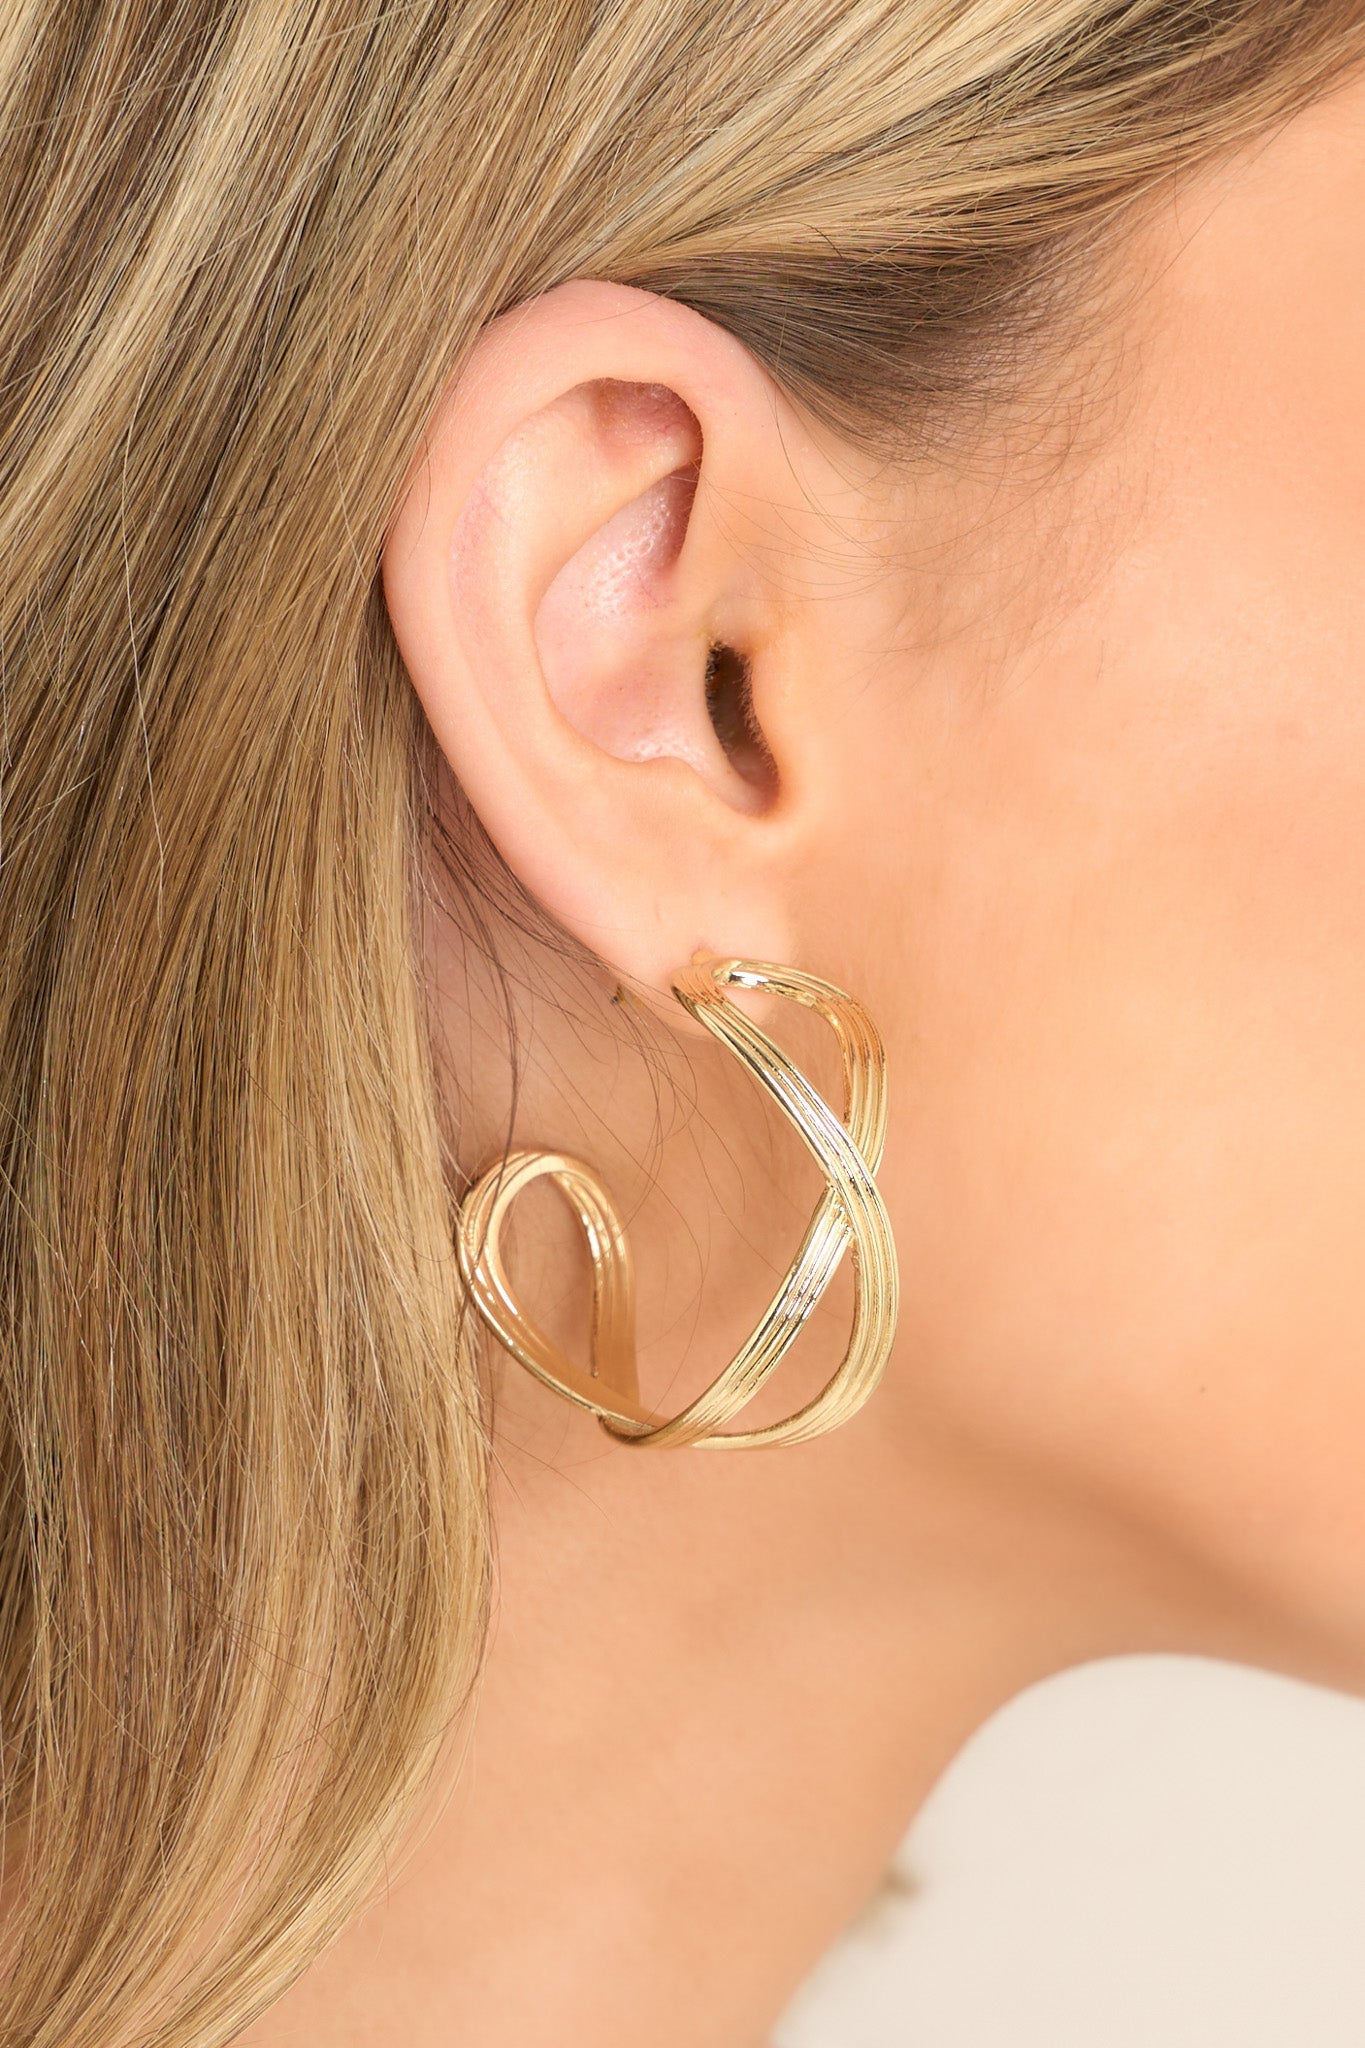 These gold hoop earrings feature gold hardware, a textured and twisted design, and secure post backings.